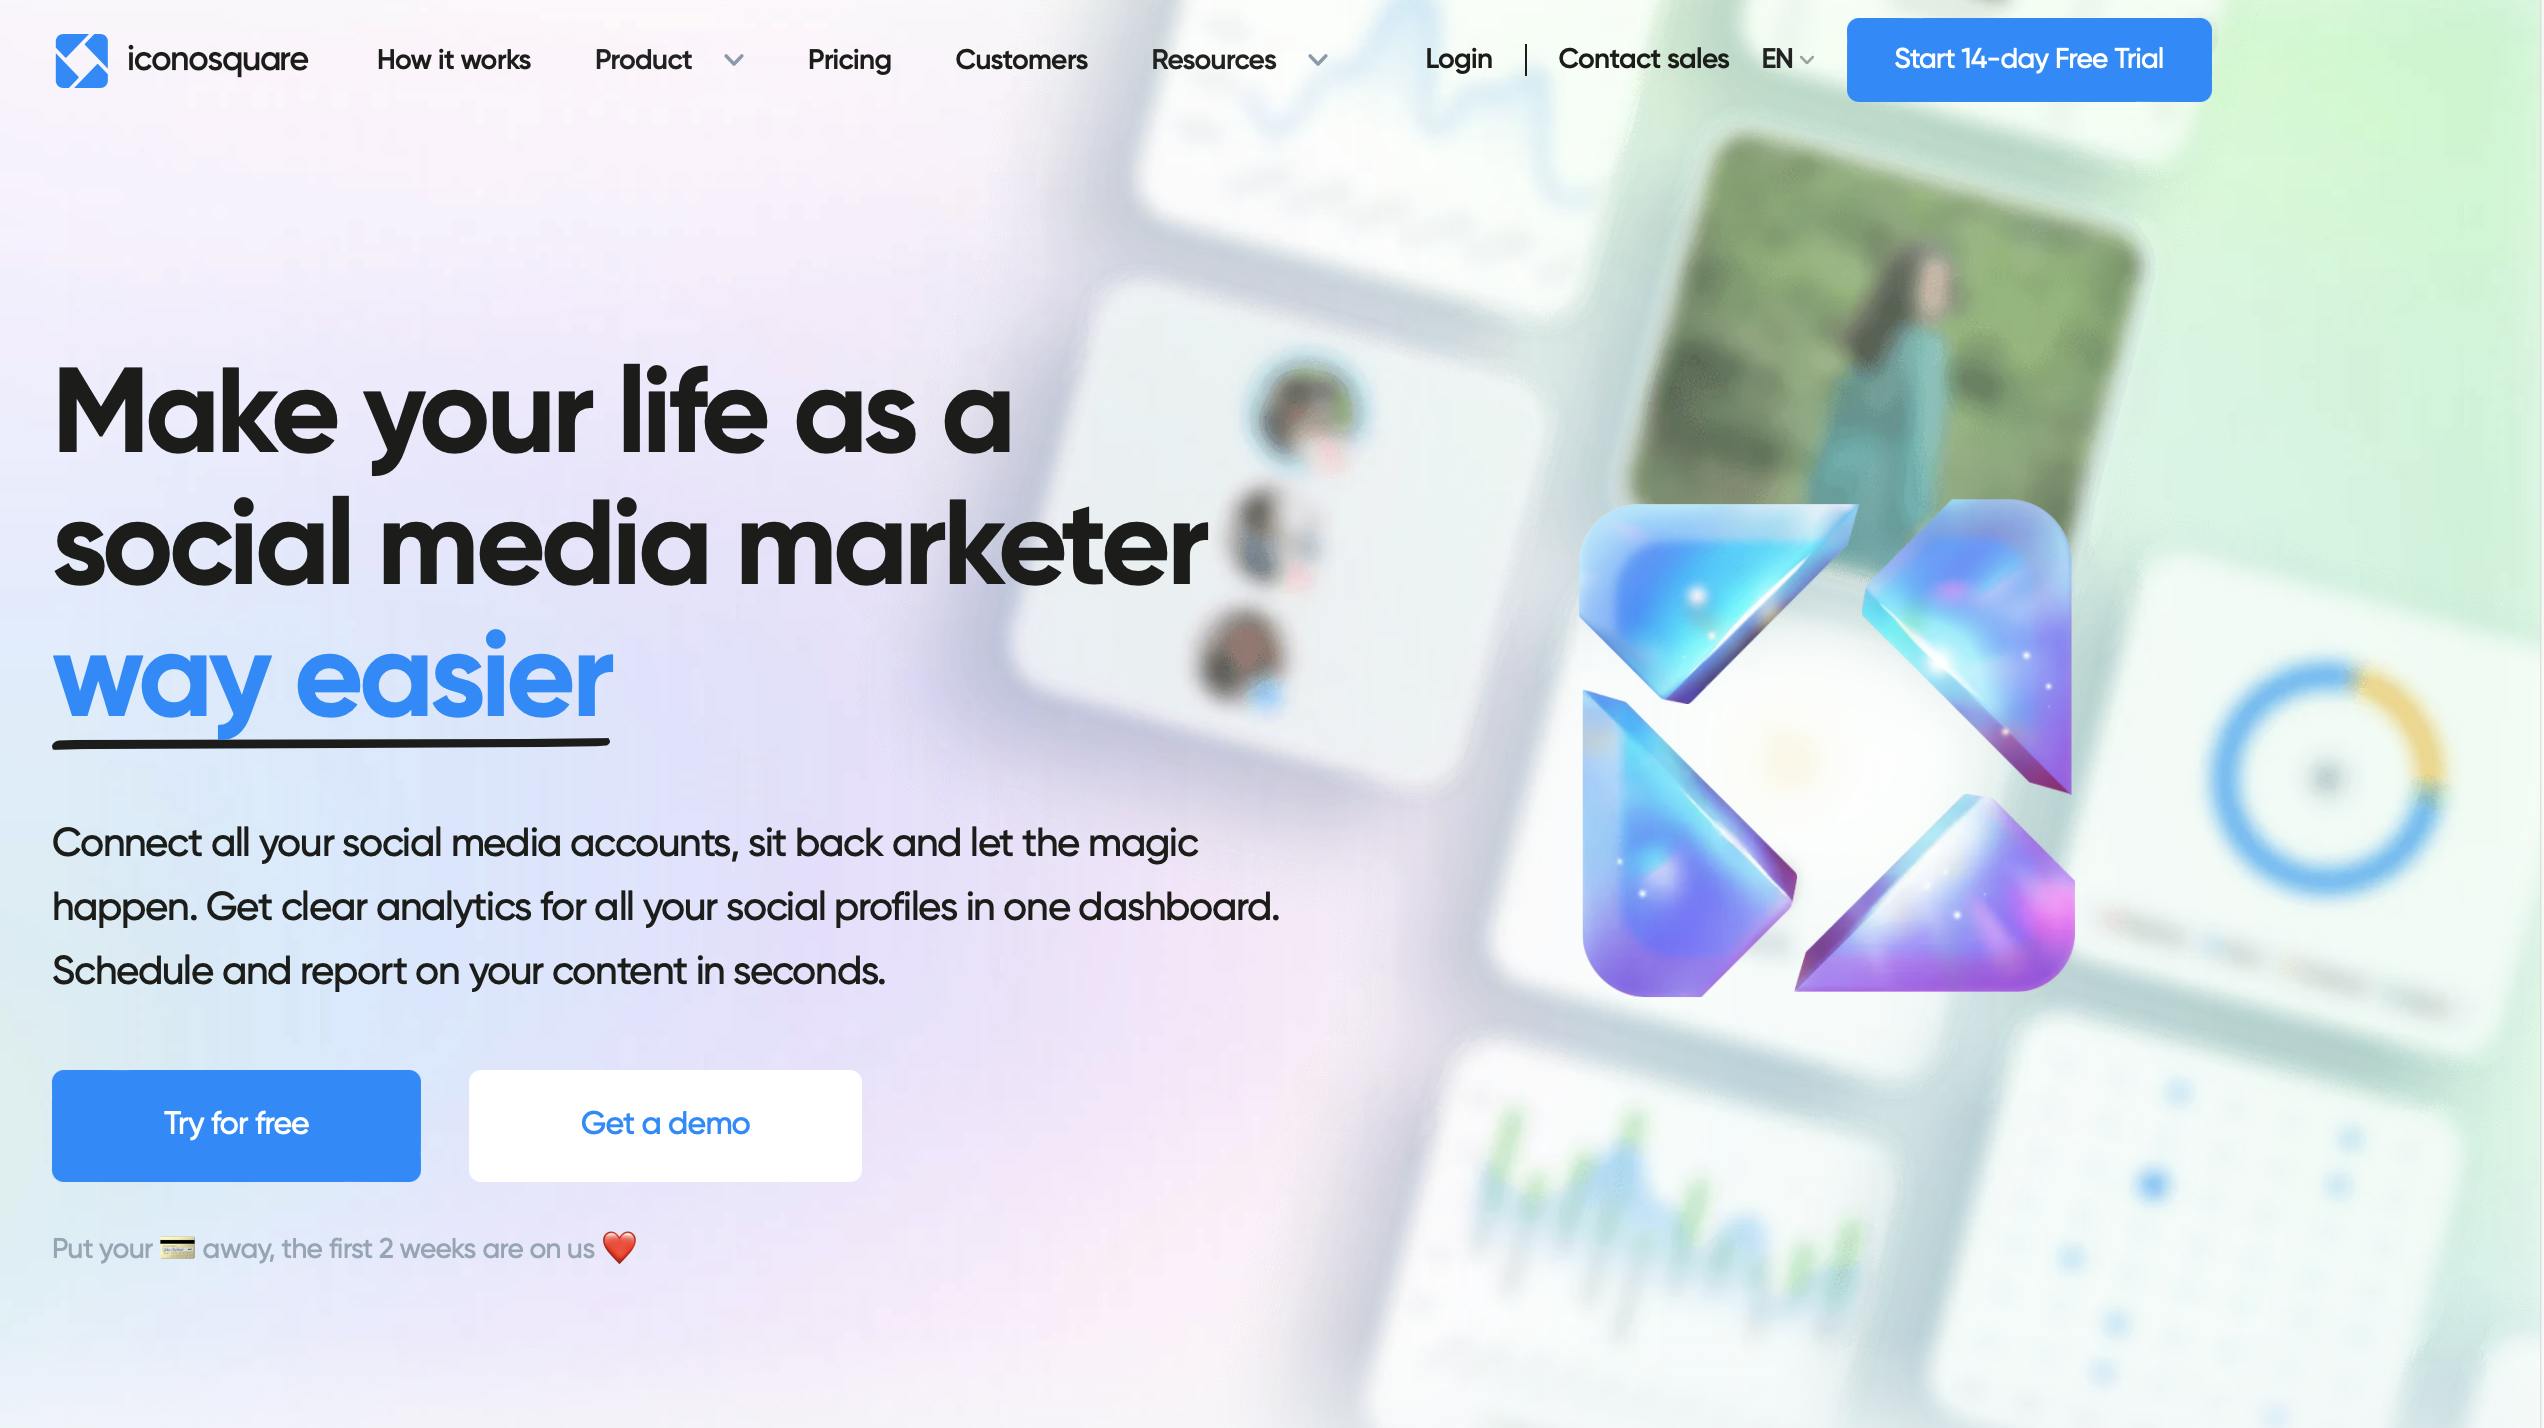 Iconosquare social media scheduling and analytics tool